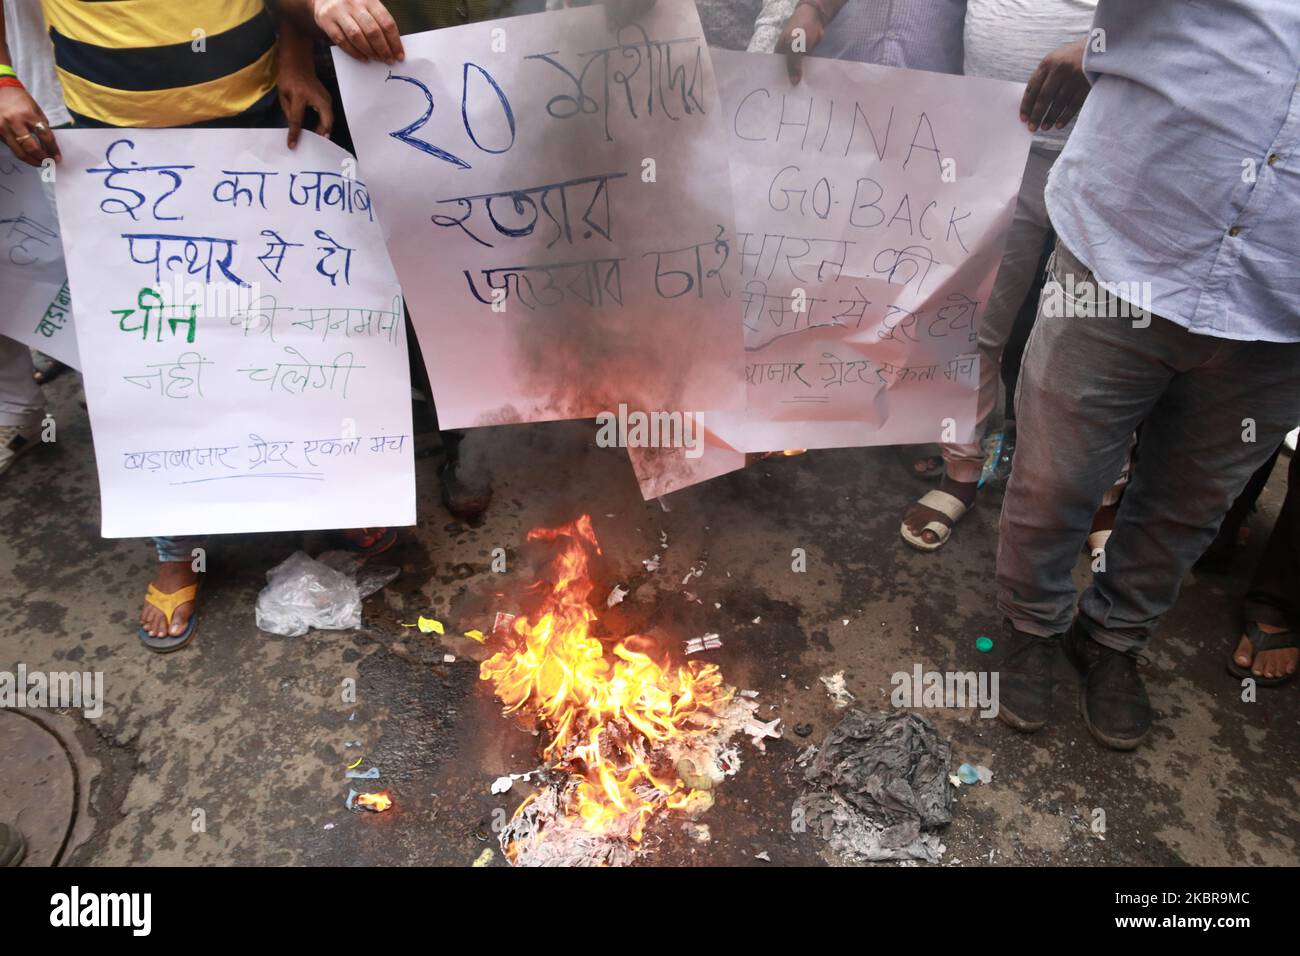 People protest and burn made in china toys and others goods and boycott shale any made in china goods during a protest against the Chinese government in Kolkata, India, on June 17, 2020. As some commentators clamored for revenge, India's government was silent Wednesday on the fallout from clashes with China's army in a disputed border area in the high Himalayas that the Indian army said claimed 20 soldiers' lives. An official Communist Party newspaper said the clash occurred because India misjudged the Chinese army's strength and willingness to respond. (Photo by Debajyoti Chakraborty/NurPhoto Stock Photo